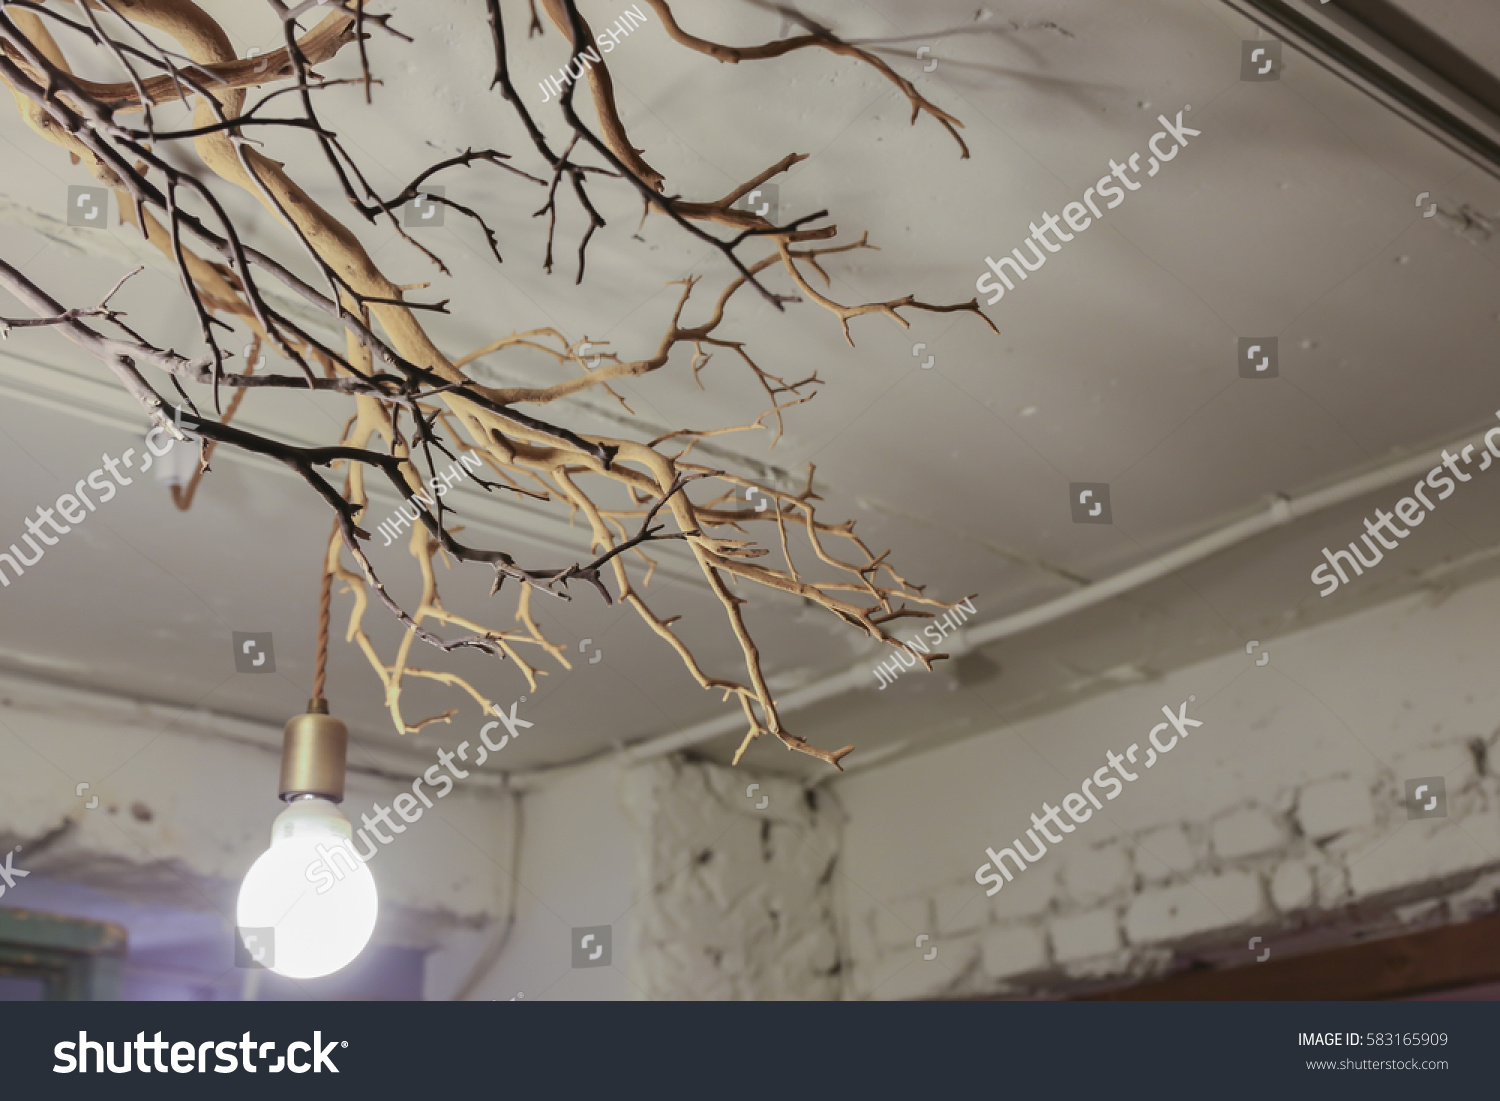 Tree Branches On Ceiling Stock Photo Edit Now 583165909